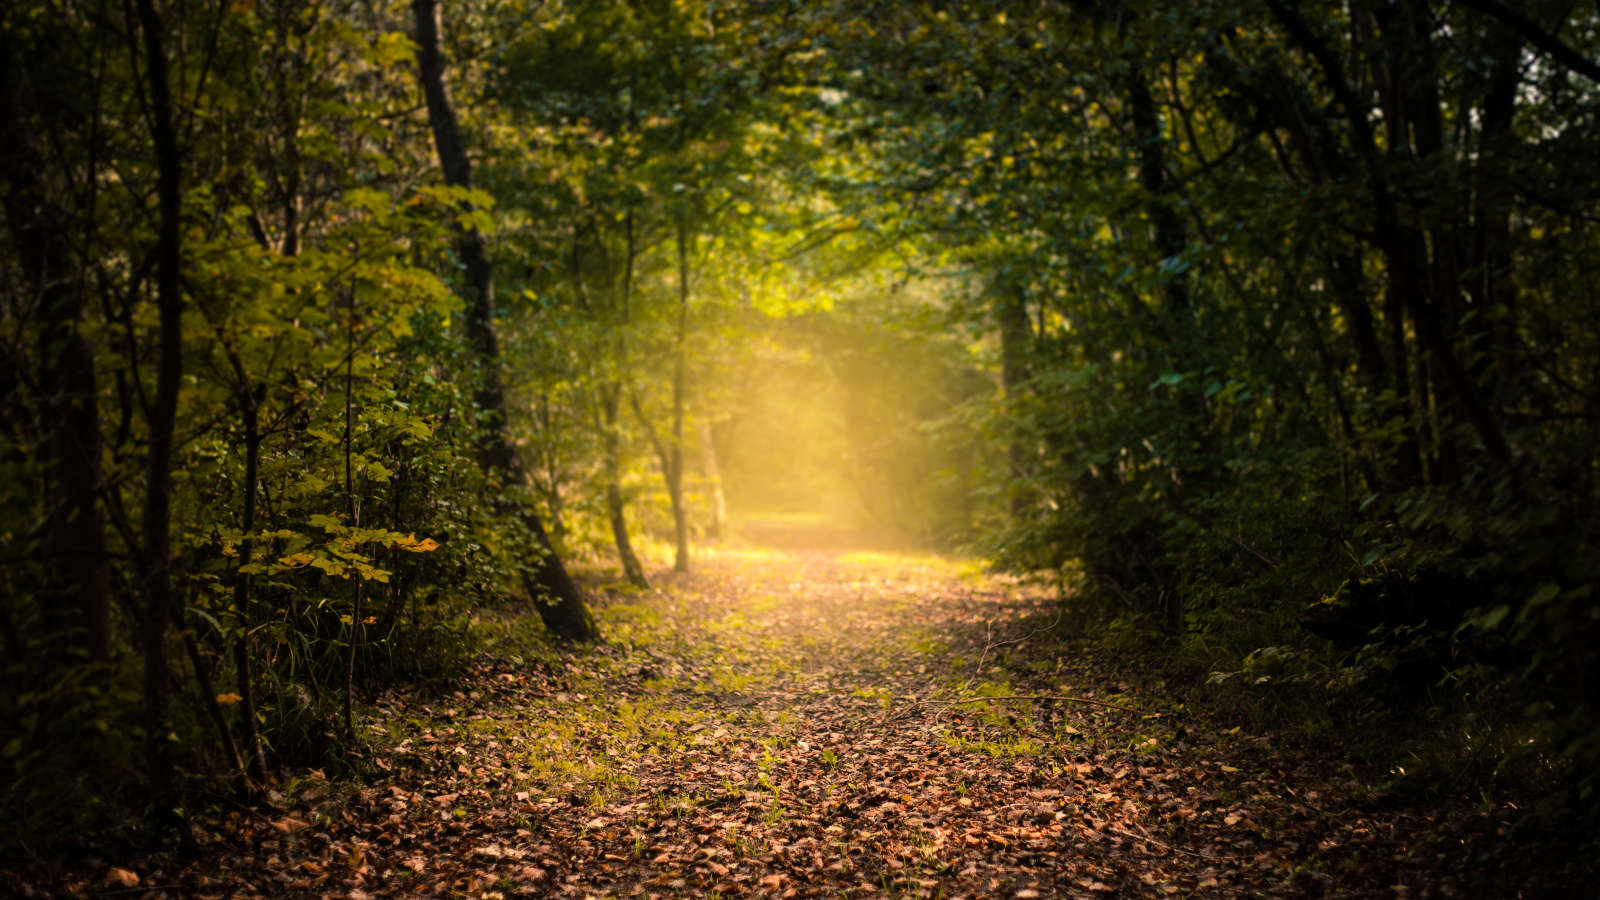 light shining through a pathway in a forest